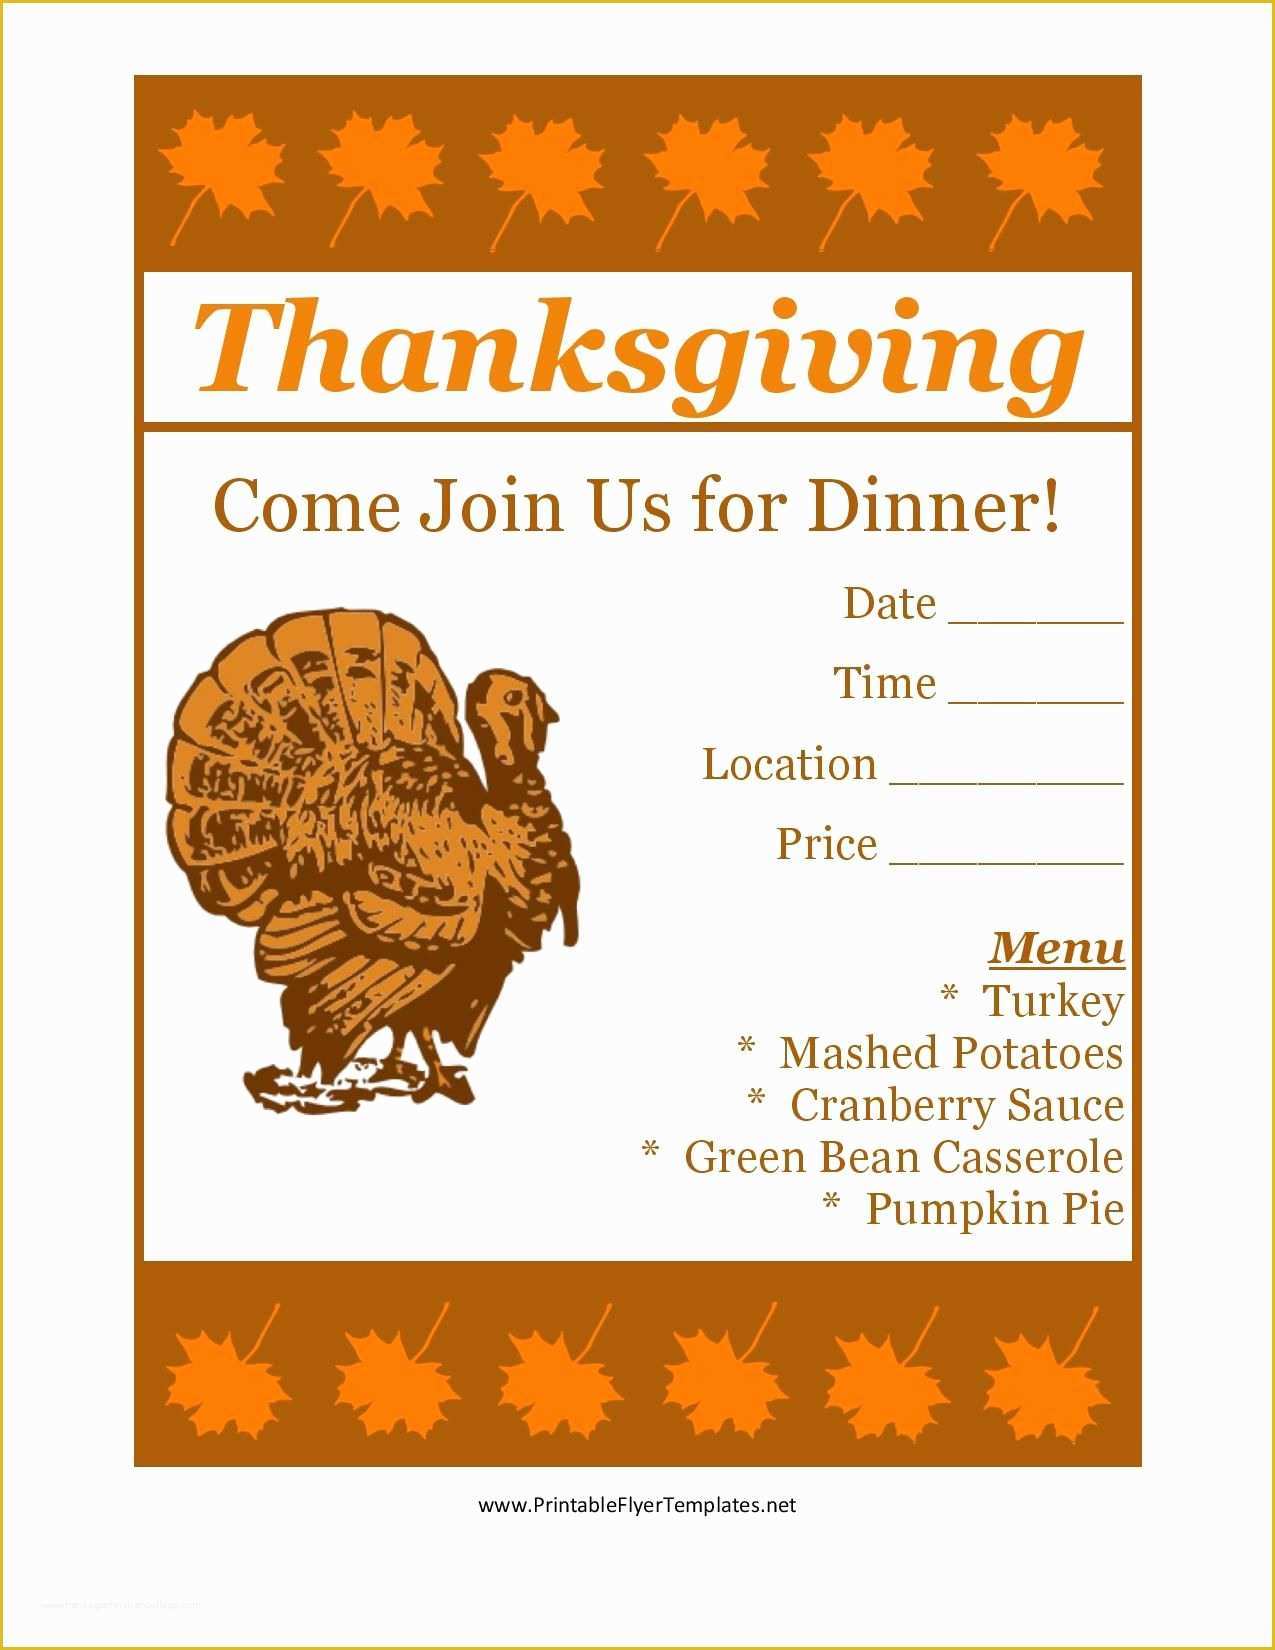 Free Printable Thanksgiving Flyer Templates Of Free Printable Thanksgiving Flyer Invintation Template